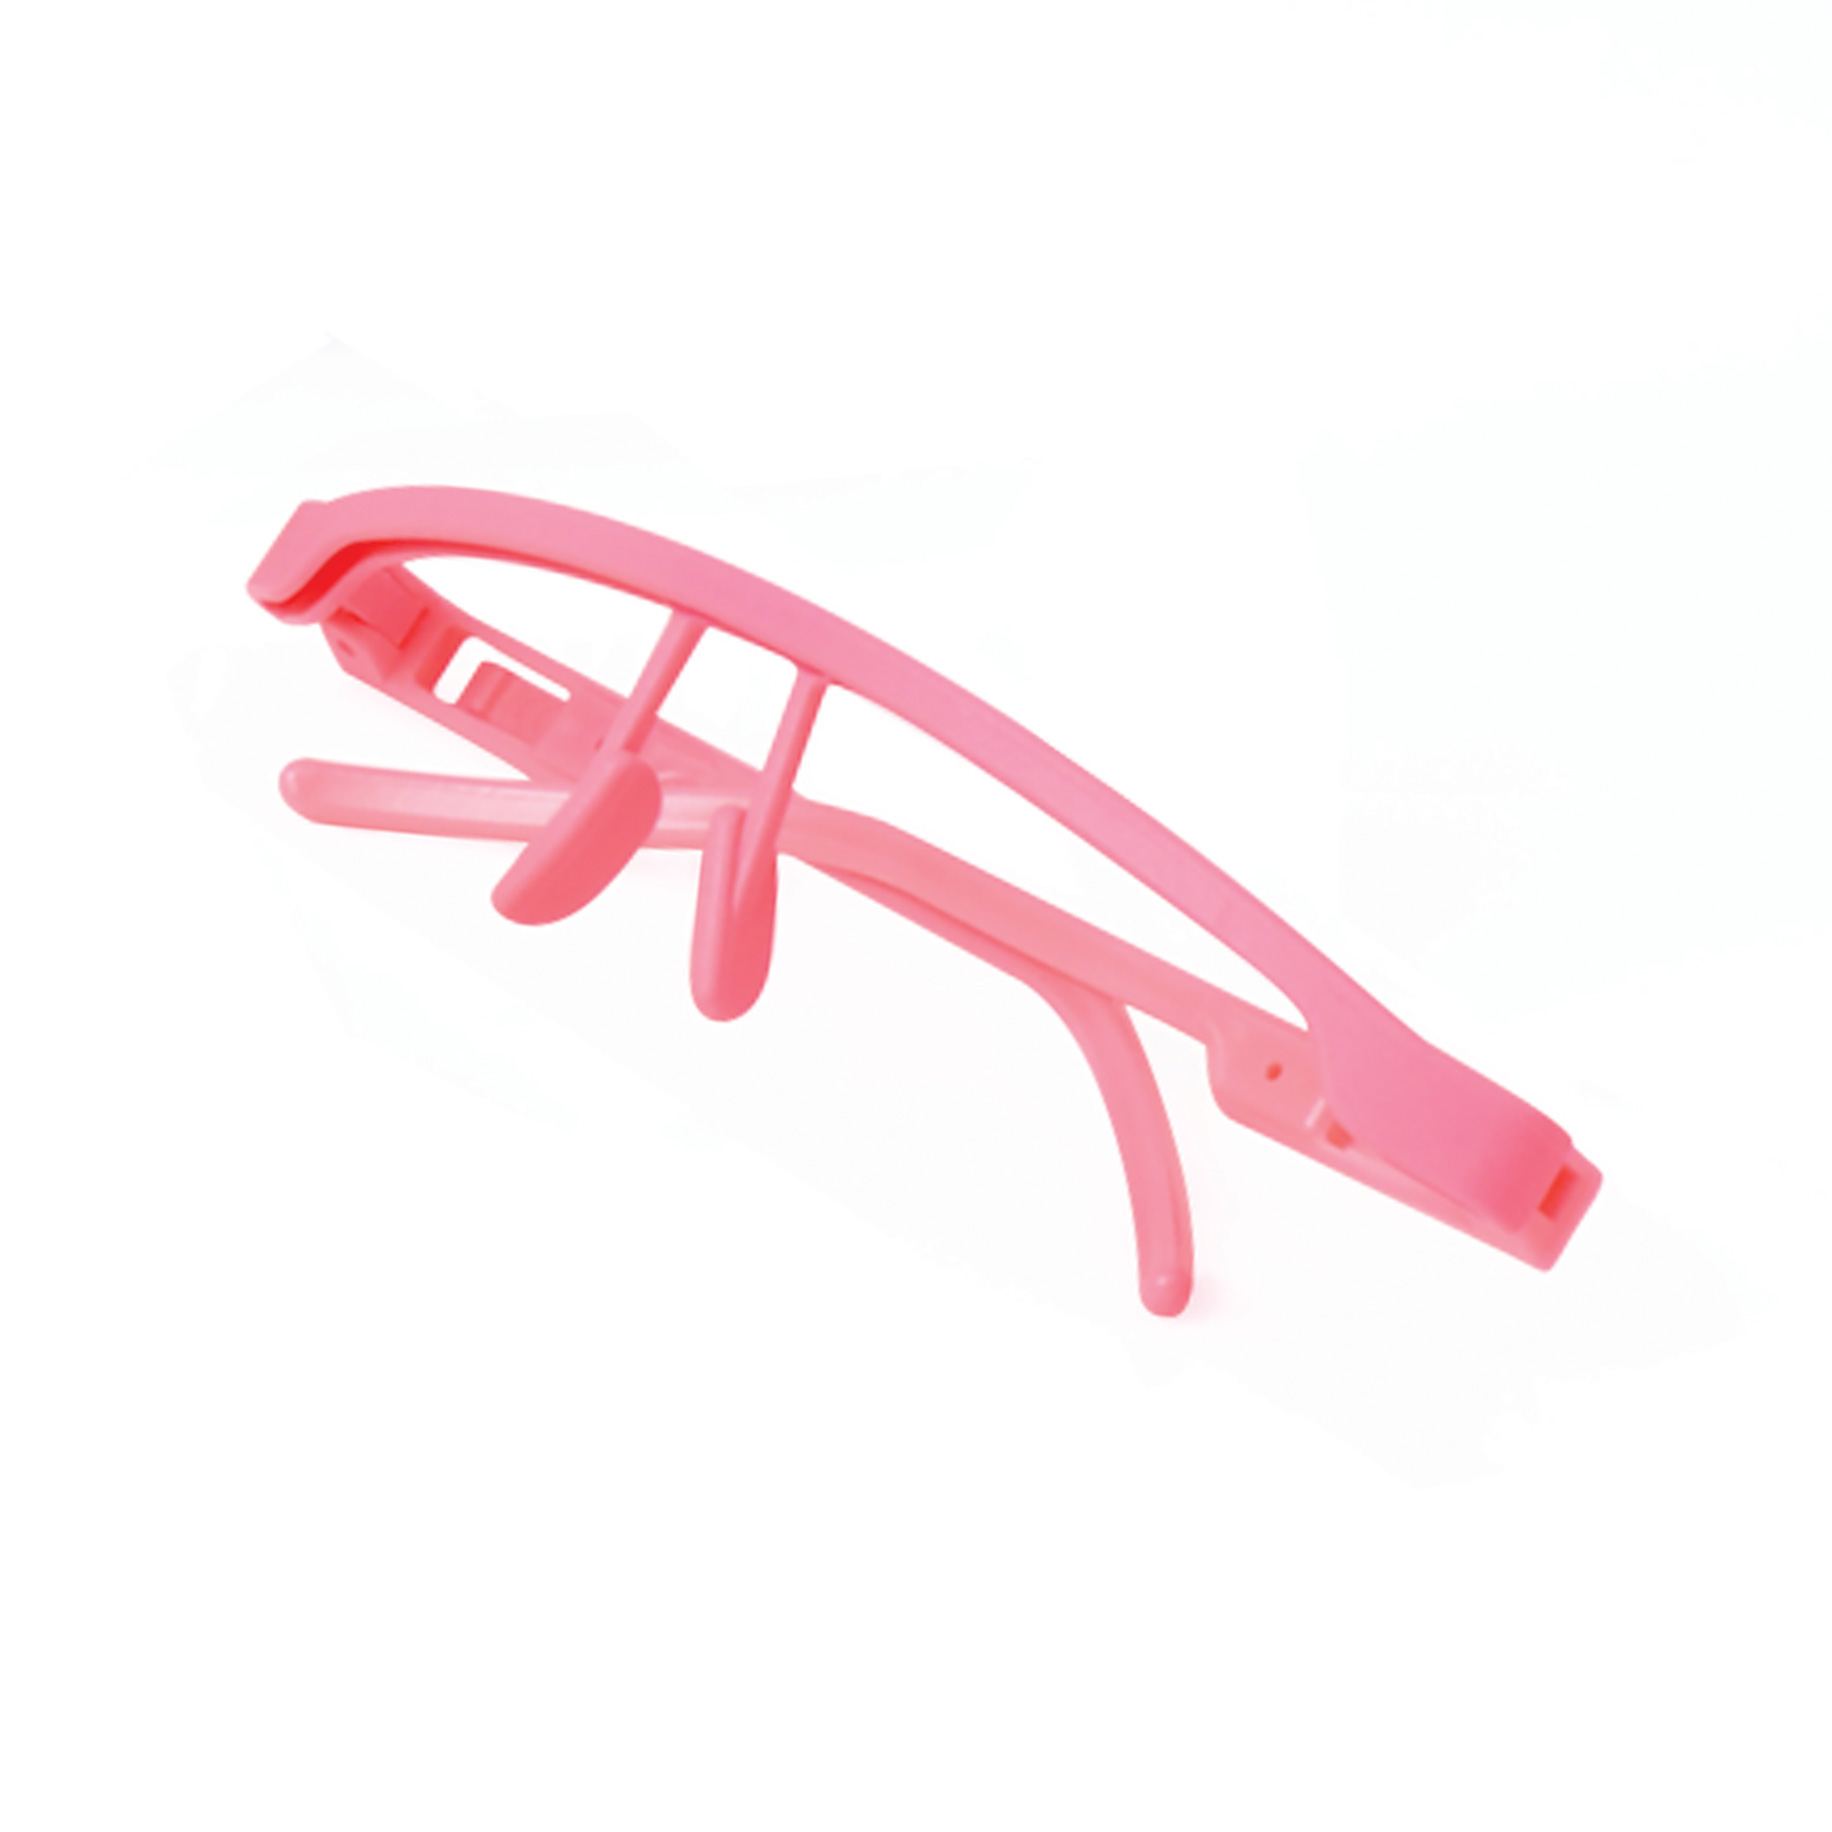 UnoTect Plus - Face Shields Pink Frame 